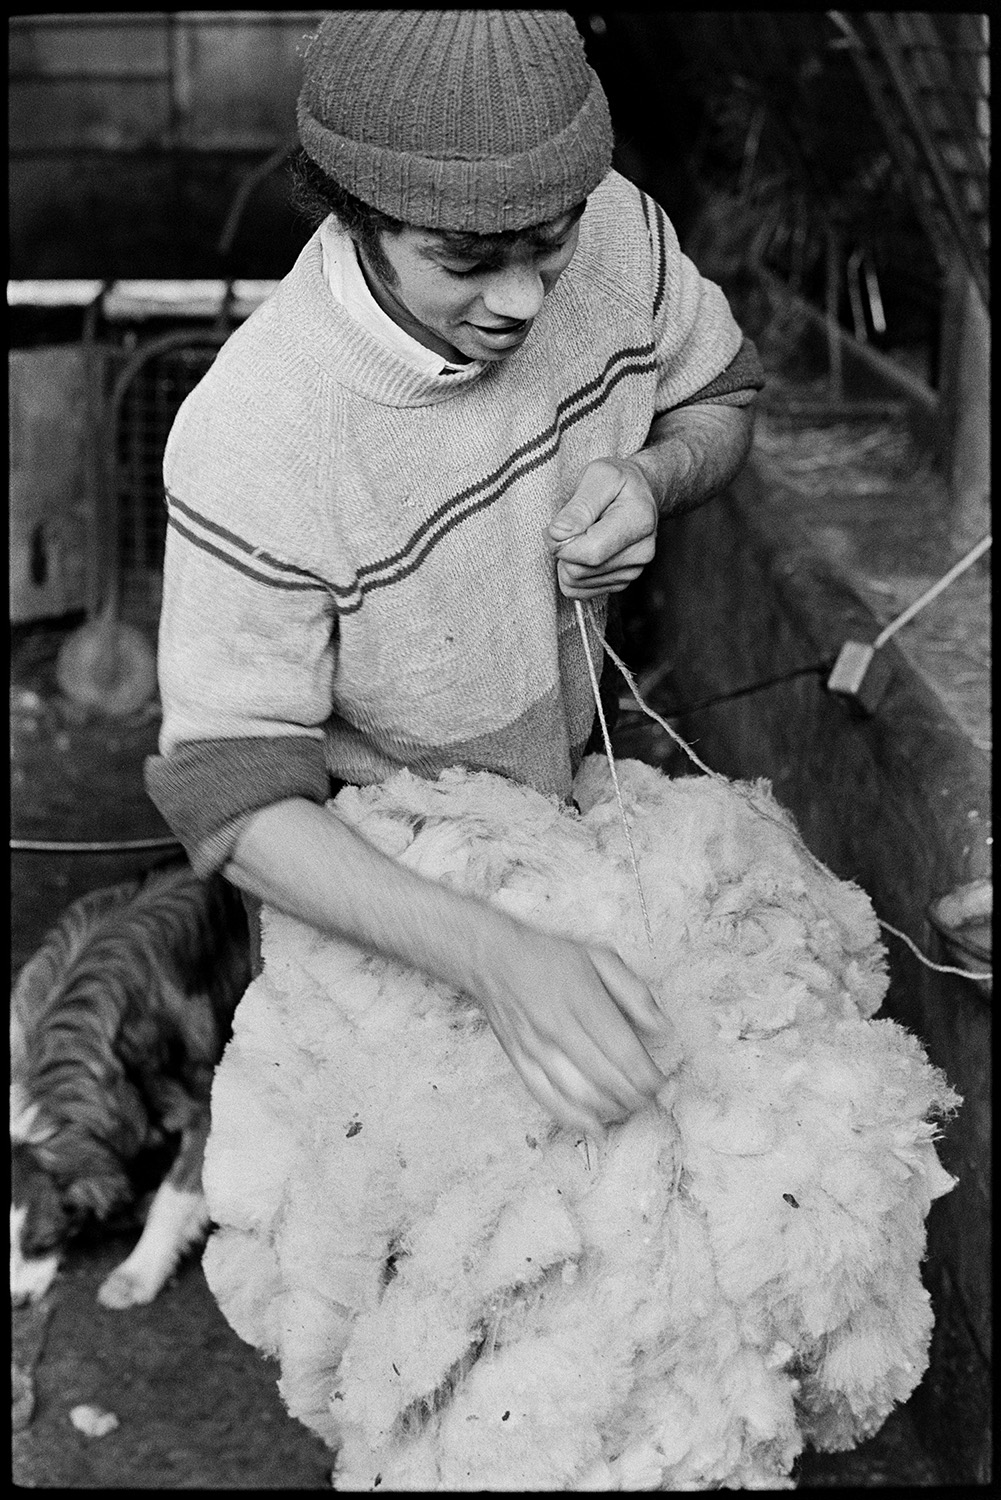 Shearing sheep. 
[David Ward tying up sheep's fleeces in a barn at Parsonage, Iddesleigh. A dog is visible in the background.]